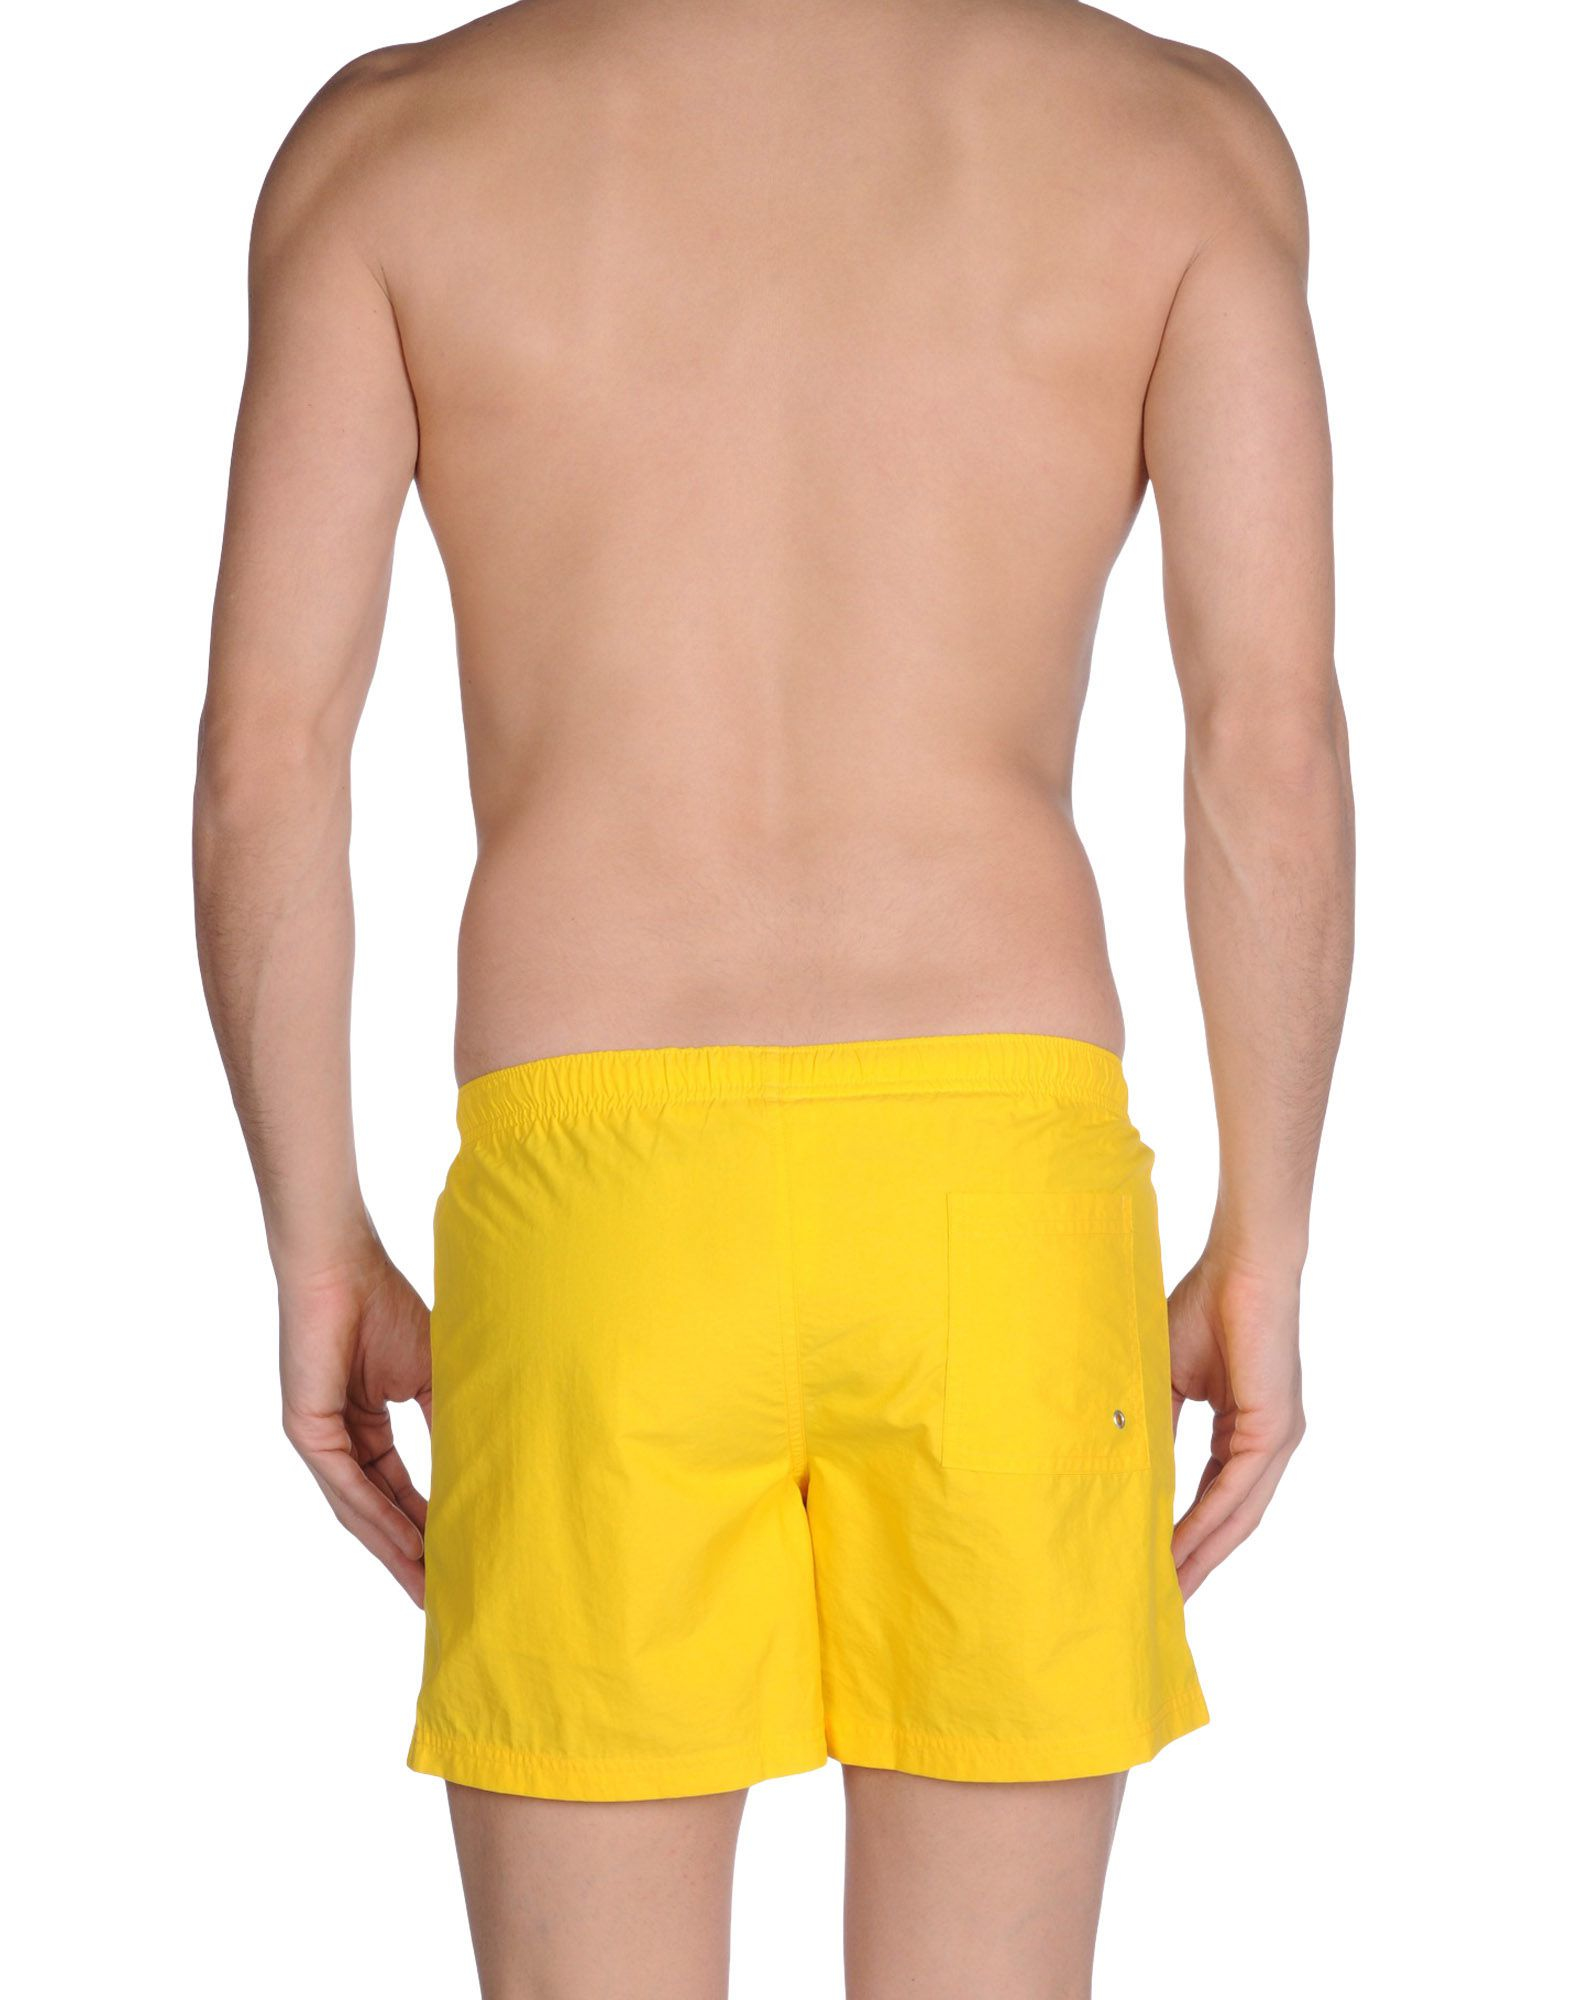 Lyst - Replay Swimming Trunk in Yellow for Men